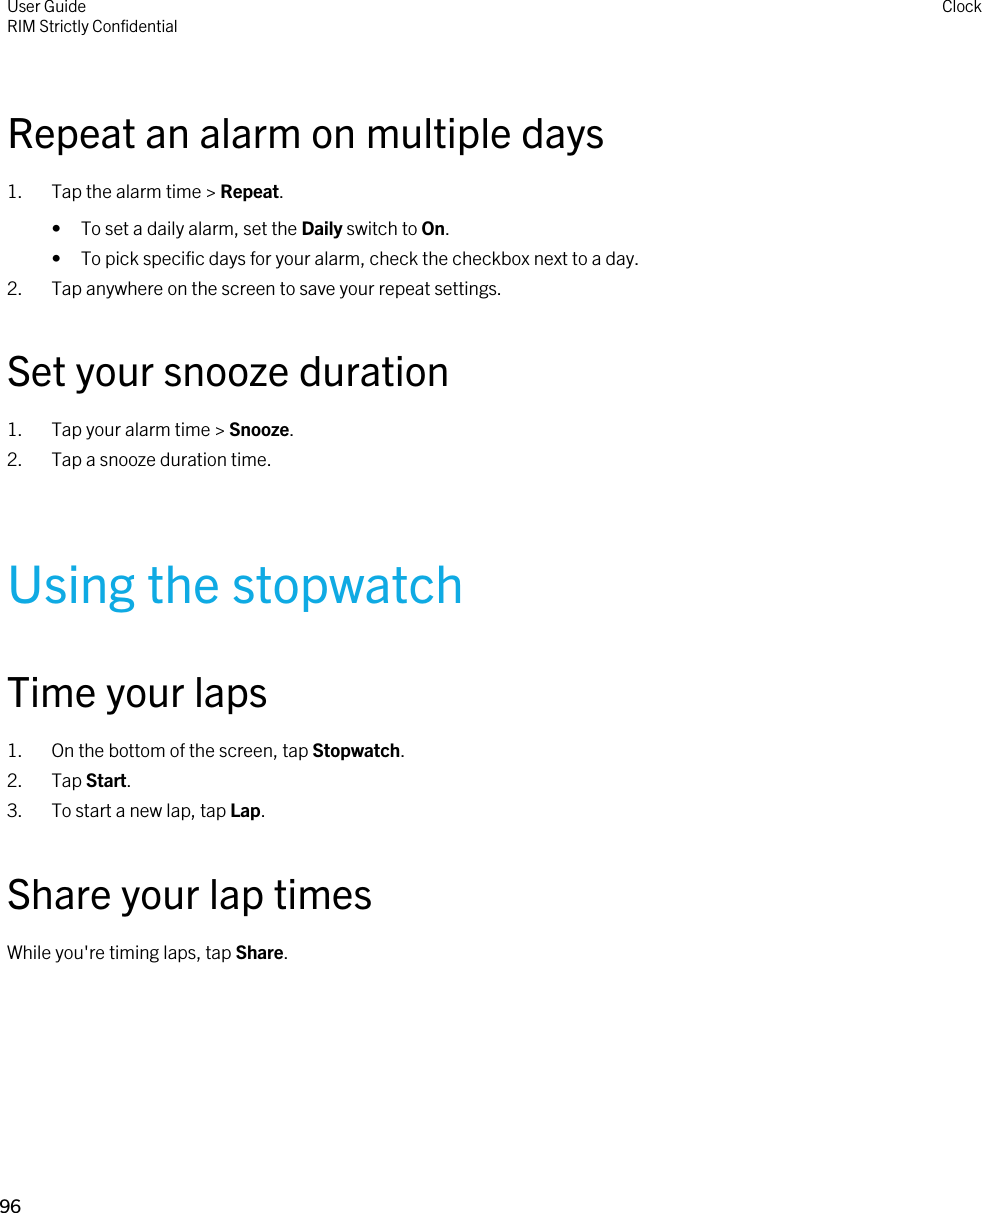 Repeat an alarm on multiple days1. Tap the alarm time &gt; Repeat.• To set a daily alarm, set the Daily switch to On.• To pick specific days for your alarm, check the checkbox next to a day.2. Tap anywhere on the screen to save your repeat settings.Set your snooze duration1. Tap your alarm time &gt; Snooze.2. Tap a snooze duration time.Using the stopwatchTime your laps1. On the bottom of the screen, tap Stopwatch.2. Tap Start.3. To start a new lap, tap Lap.Share your lap timesWhile you&apos;re timing laps, tap Share.User GuideRIM Strictly ConfidentialClock96 